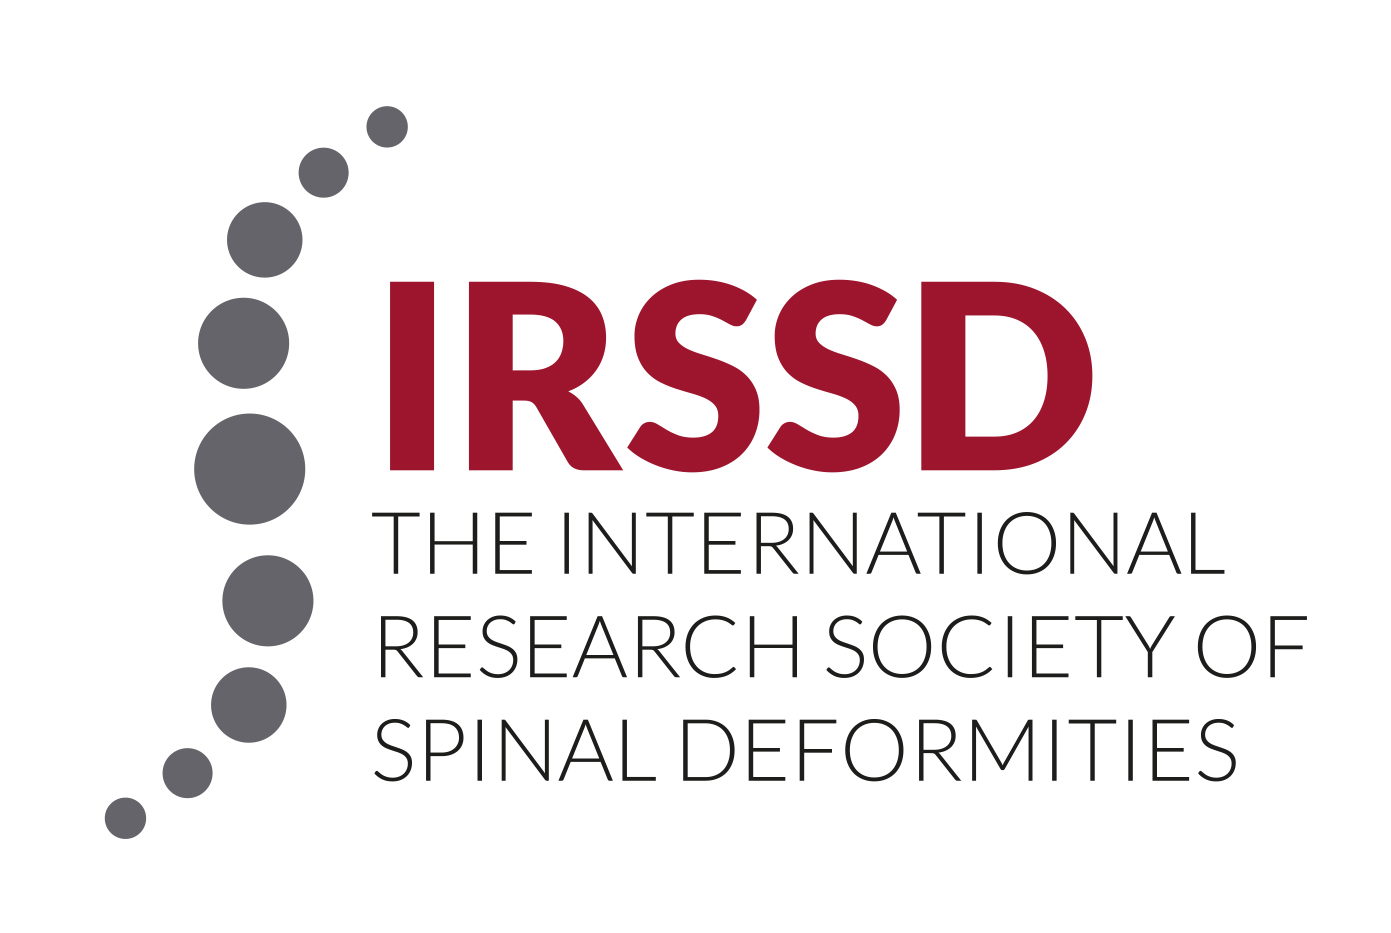 The International Research Society of Spinal Deformities